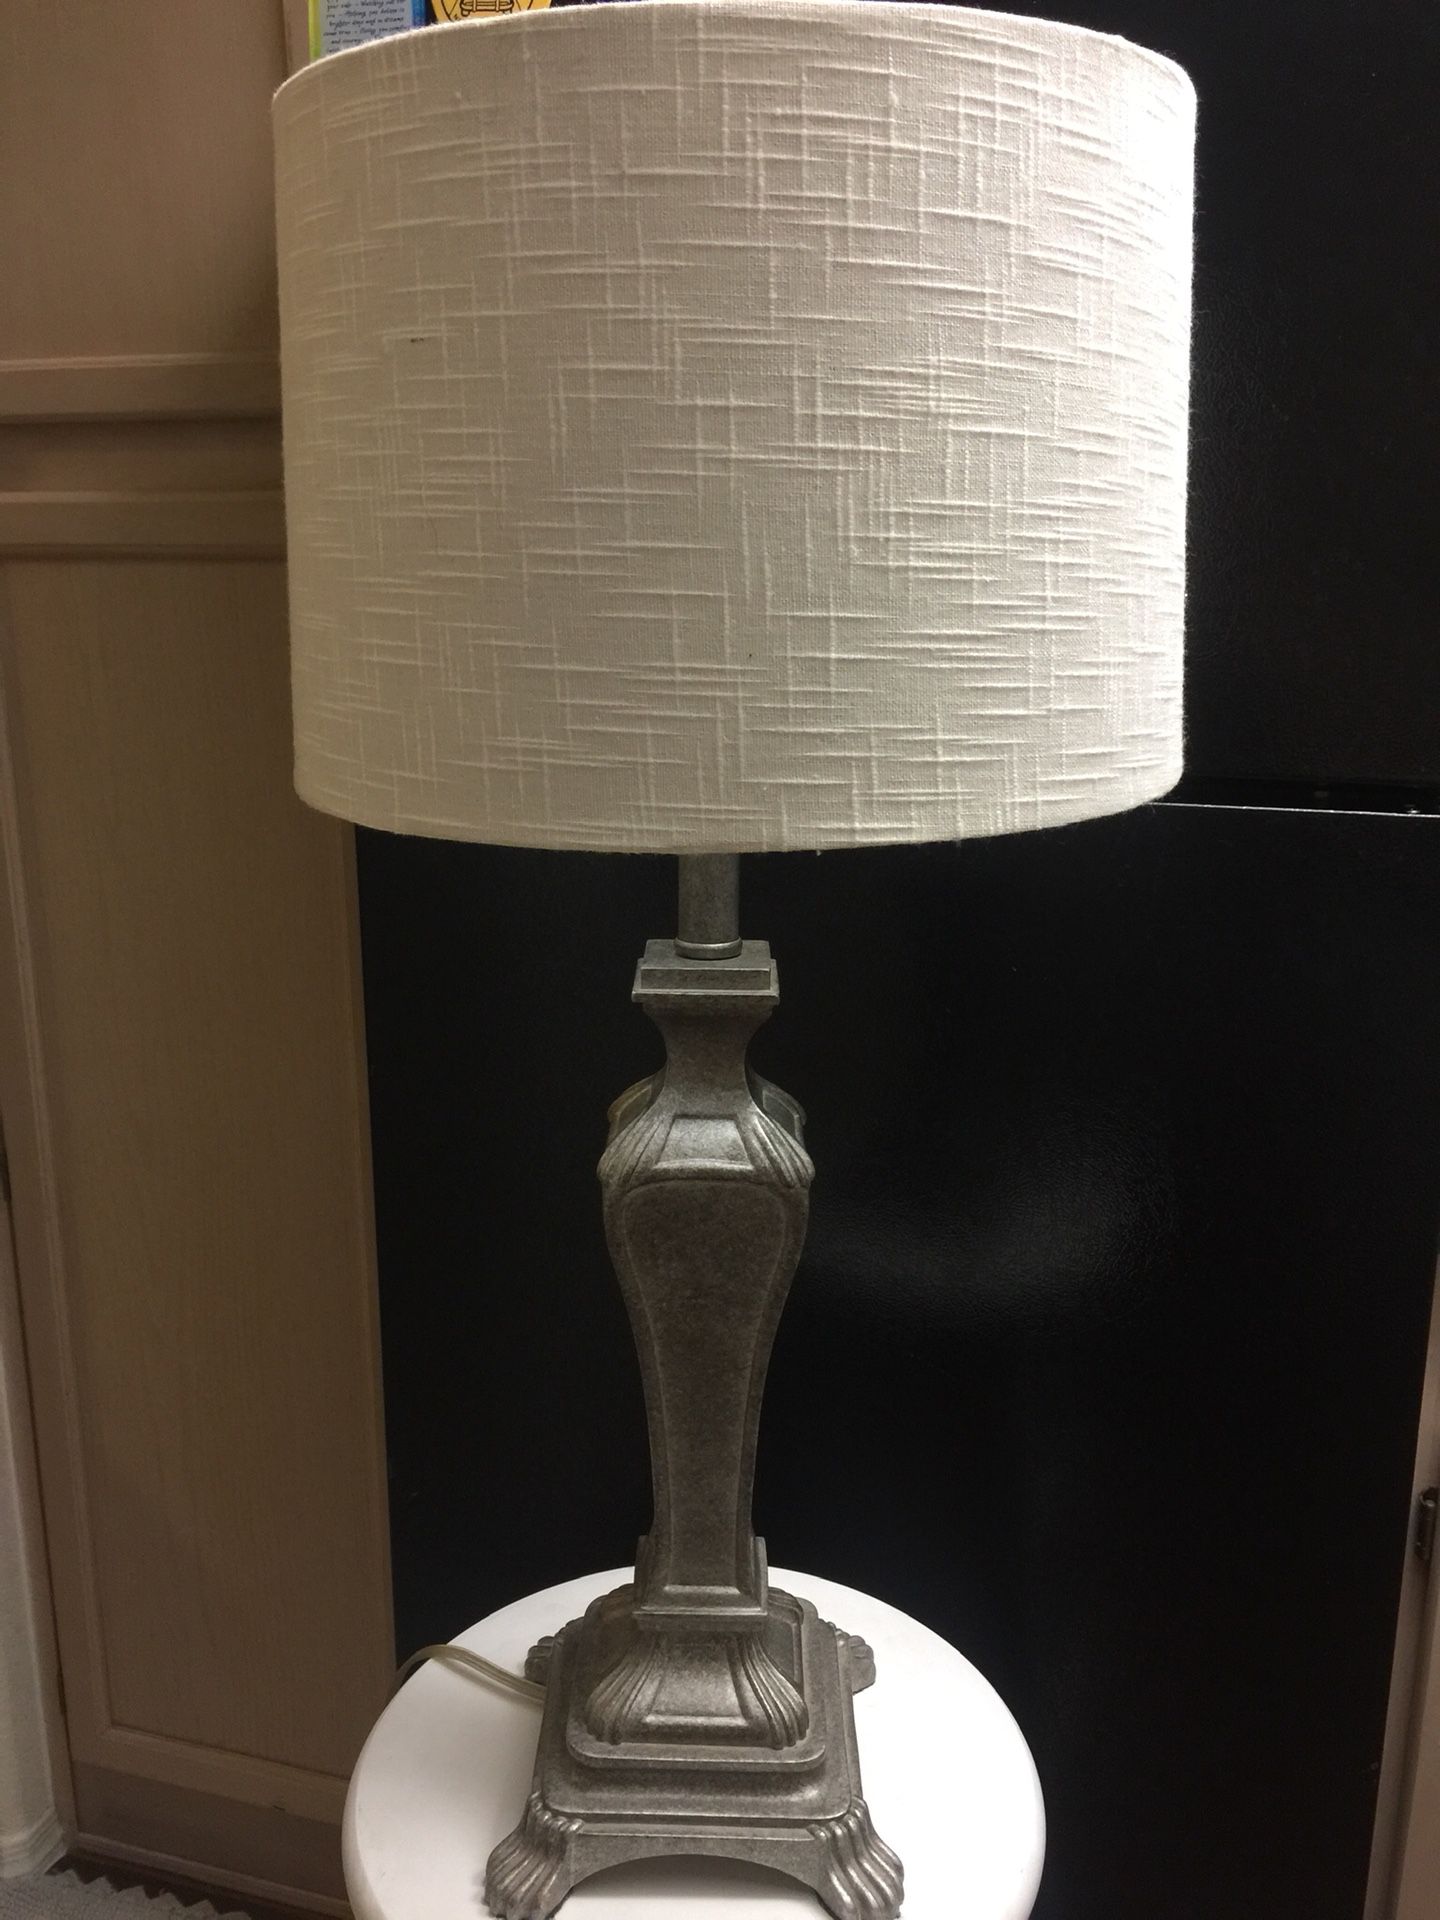 Lamp & shade (silver metal base and beige shade) $10